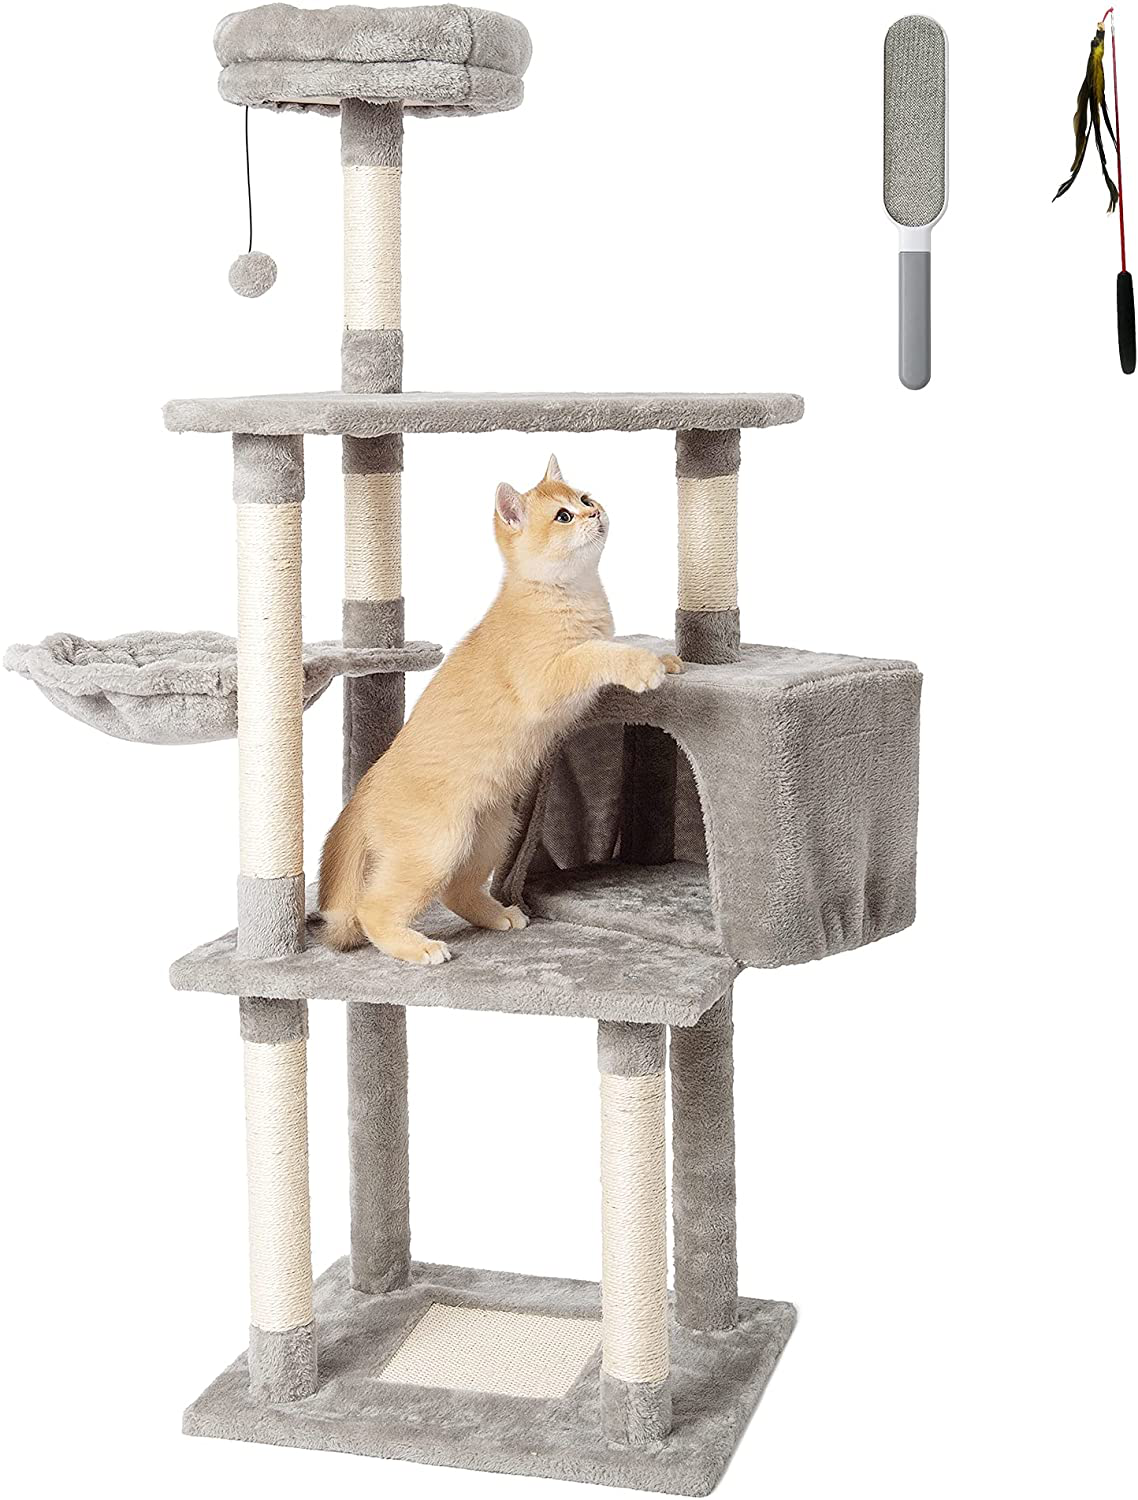 Pina Cat Tree Cat Tower 51 Inches for Indoor Cats, Multi-Level Cat Furniture with Hammocks,Sisal Covered Scratching Posts,Cat Climbing Tower with Hanging Pompoms Can Provide Cat Entertainment.